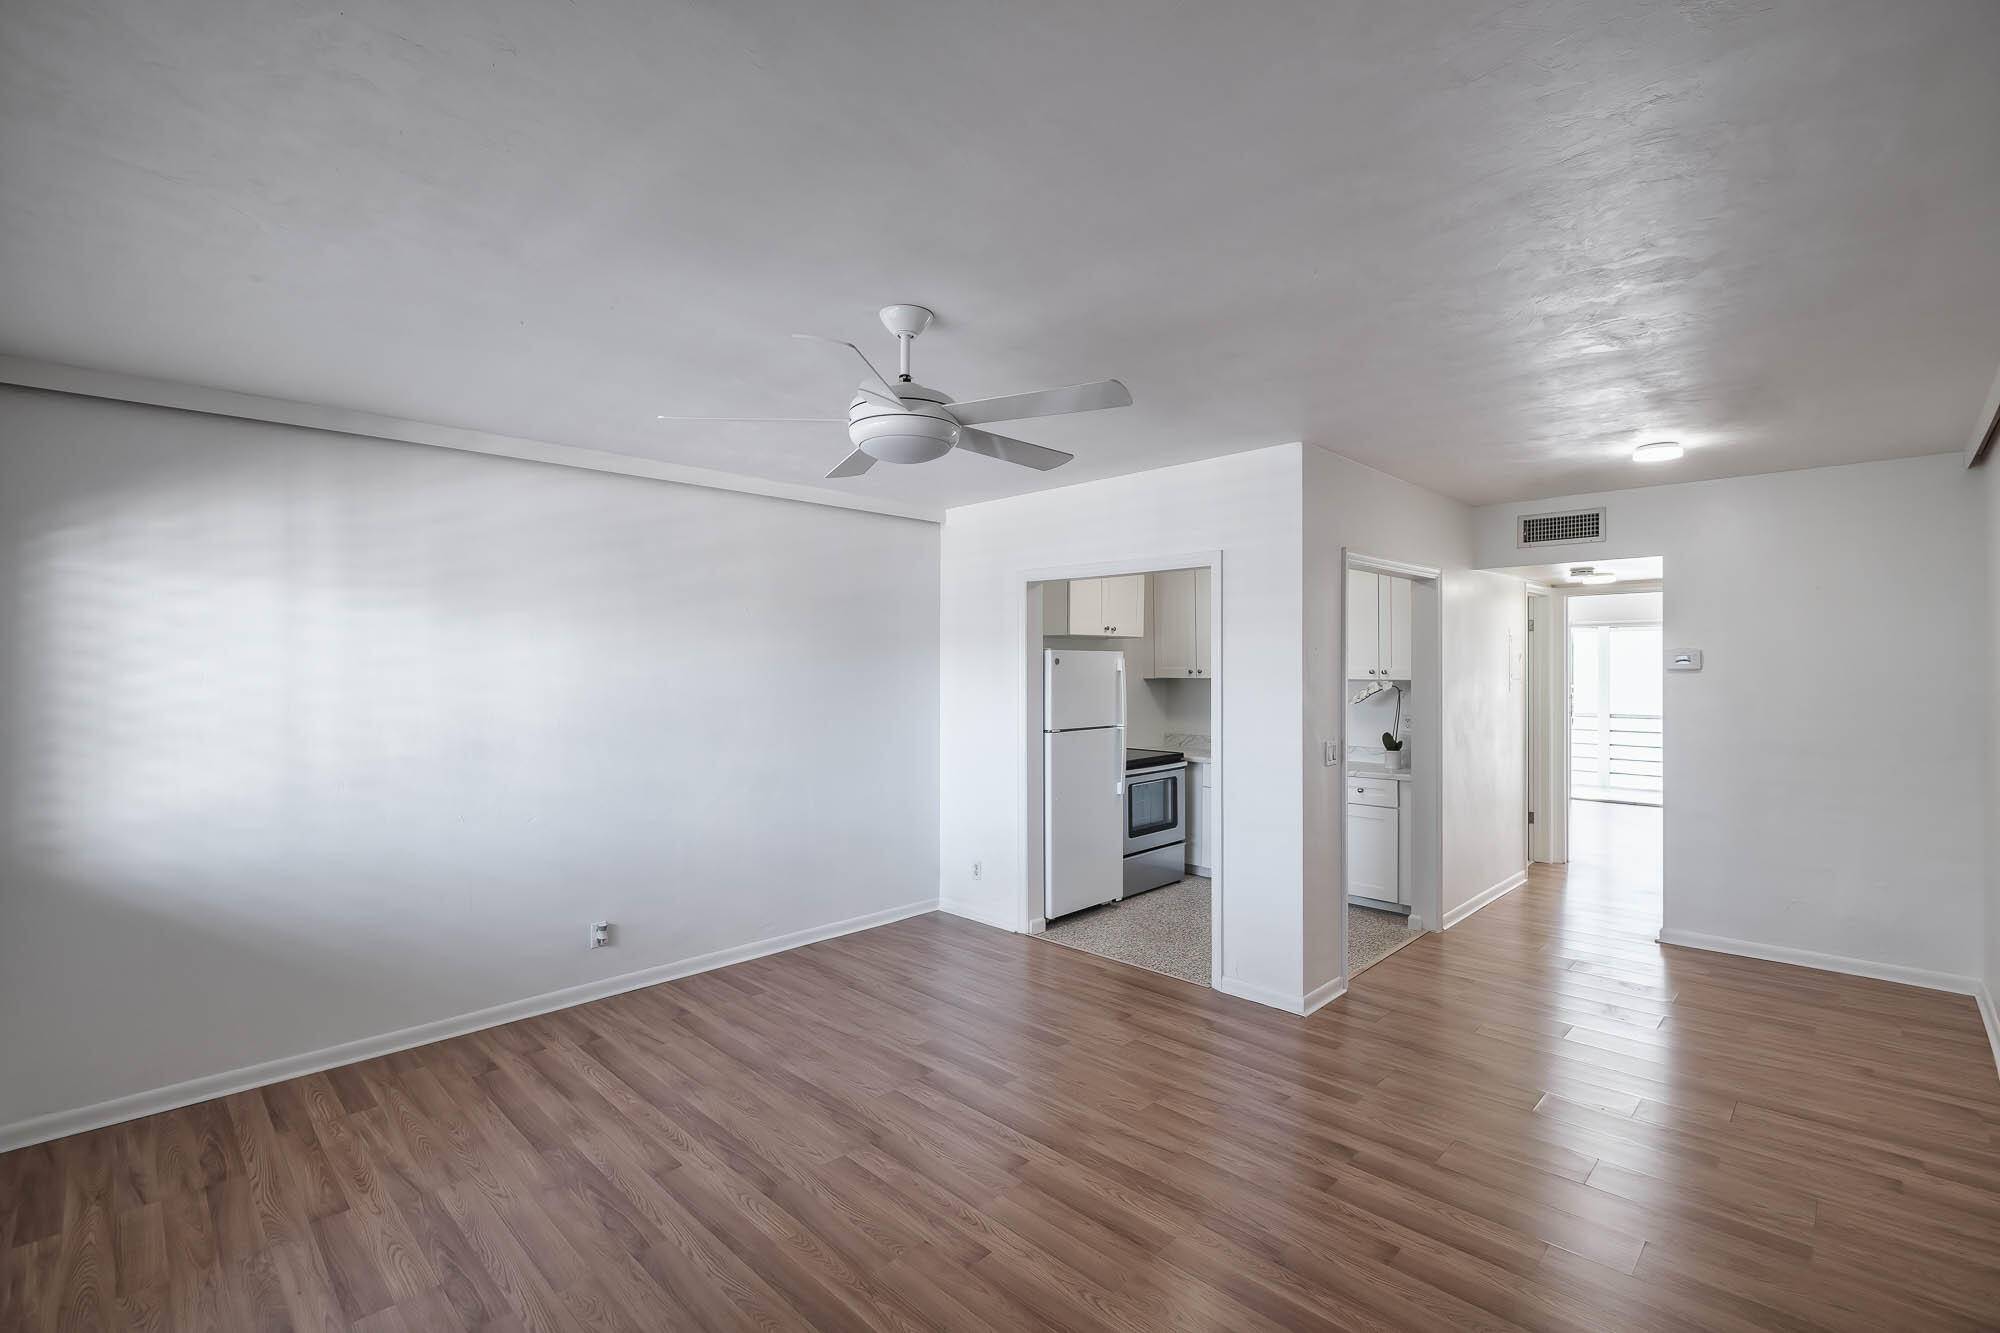 MOTIVATED SELLER ! ''Welcome to a delightful 1 bedroom, 1 bath condo gem in the heart of Lake Worth Beach, FL, 33461.